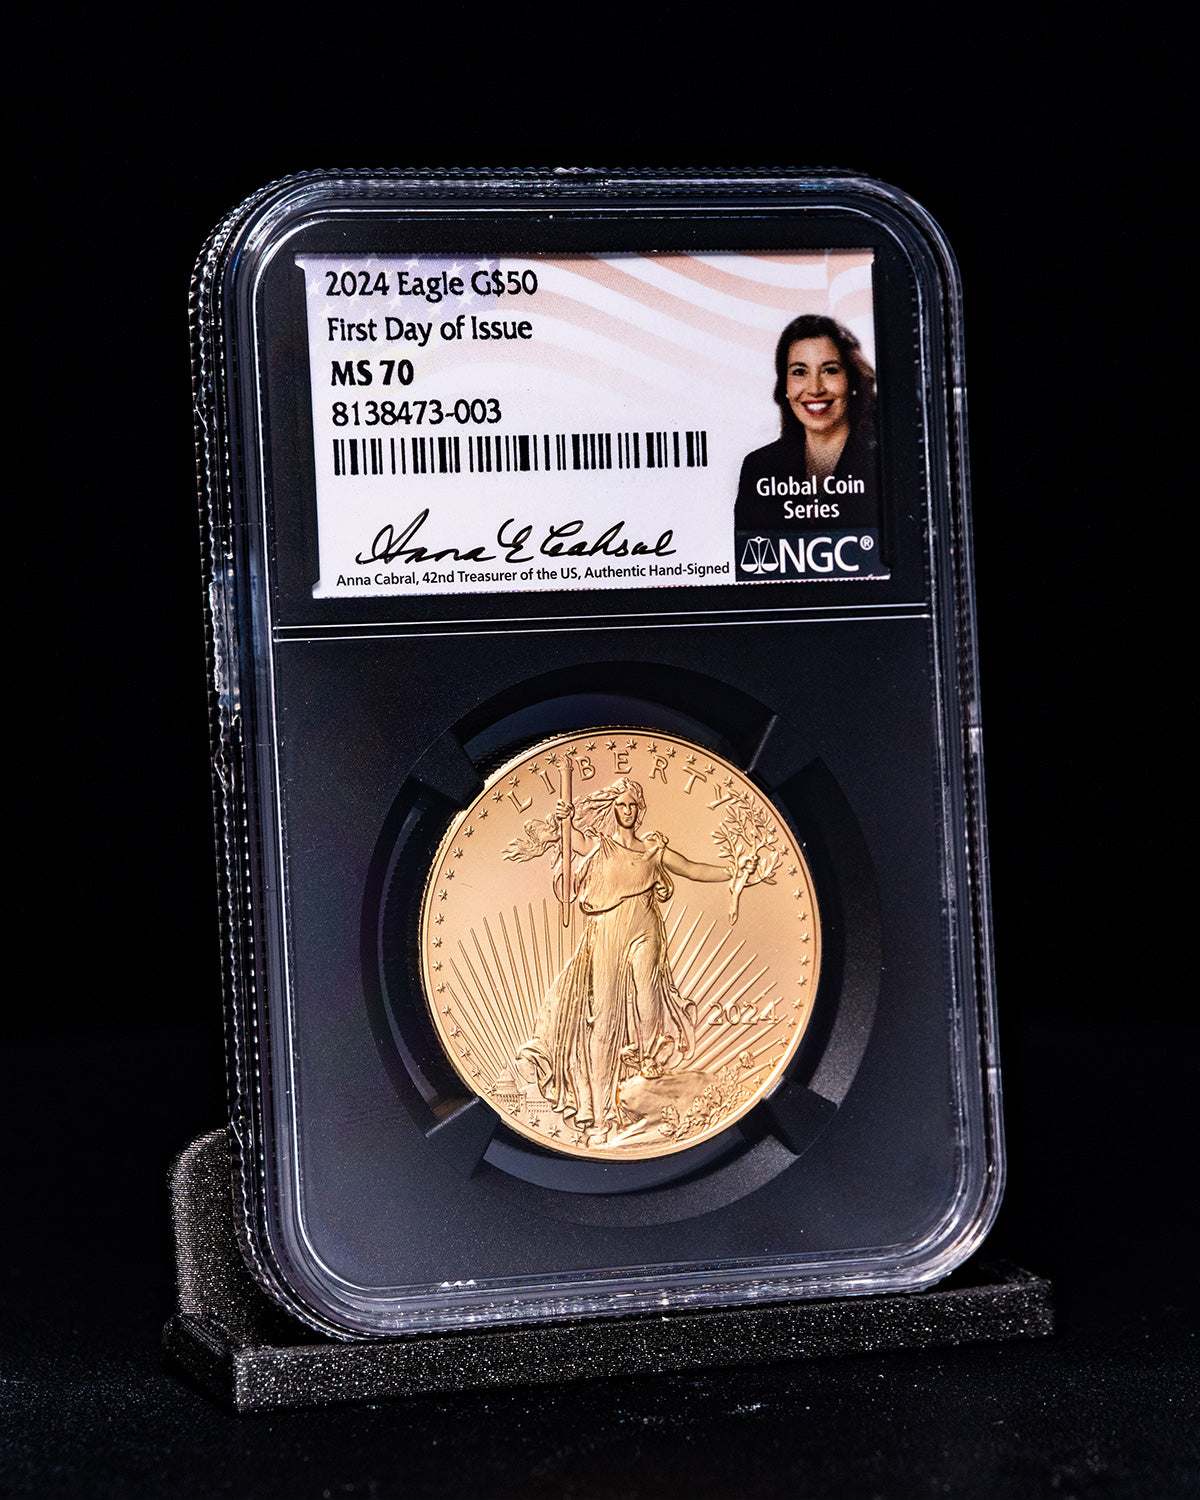 2024 $50 Gold Eagle | First Day of Issue Global Coin Series NGC MS70 | Anna Cabral Autographed